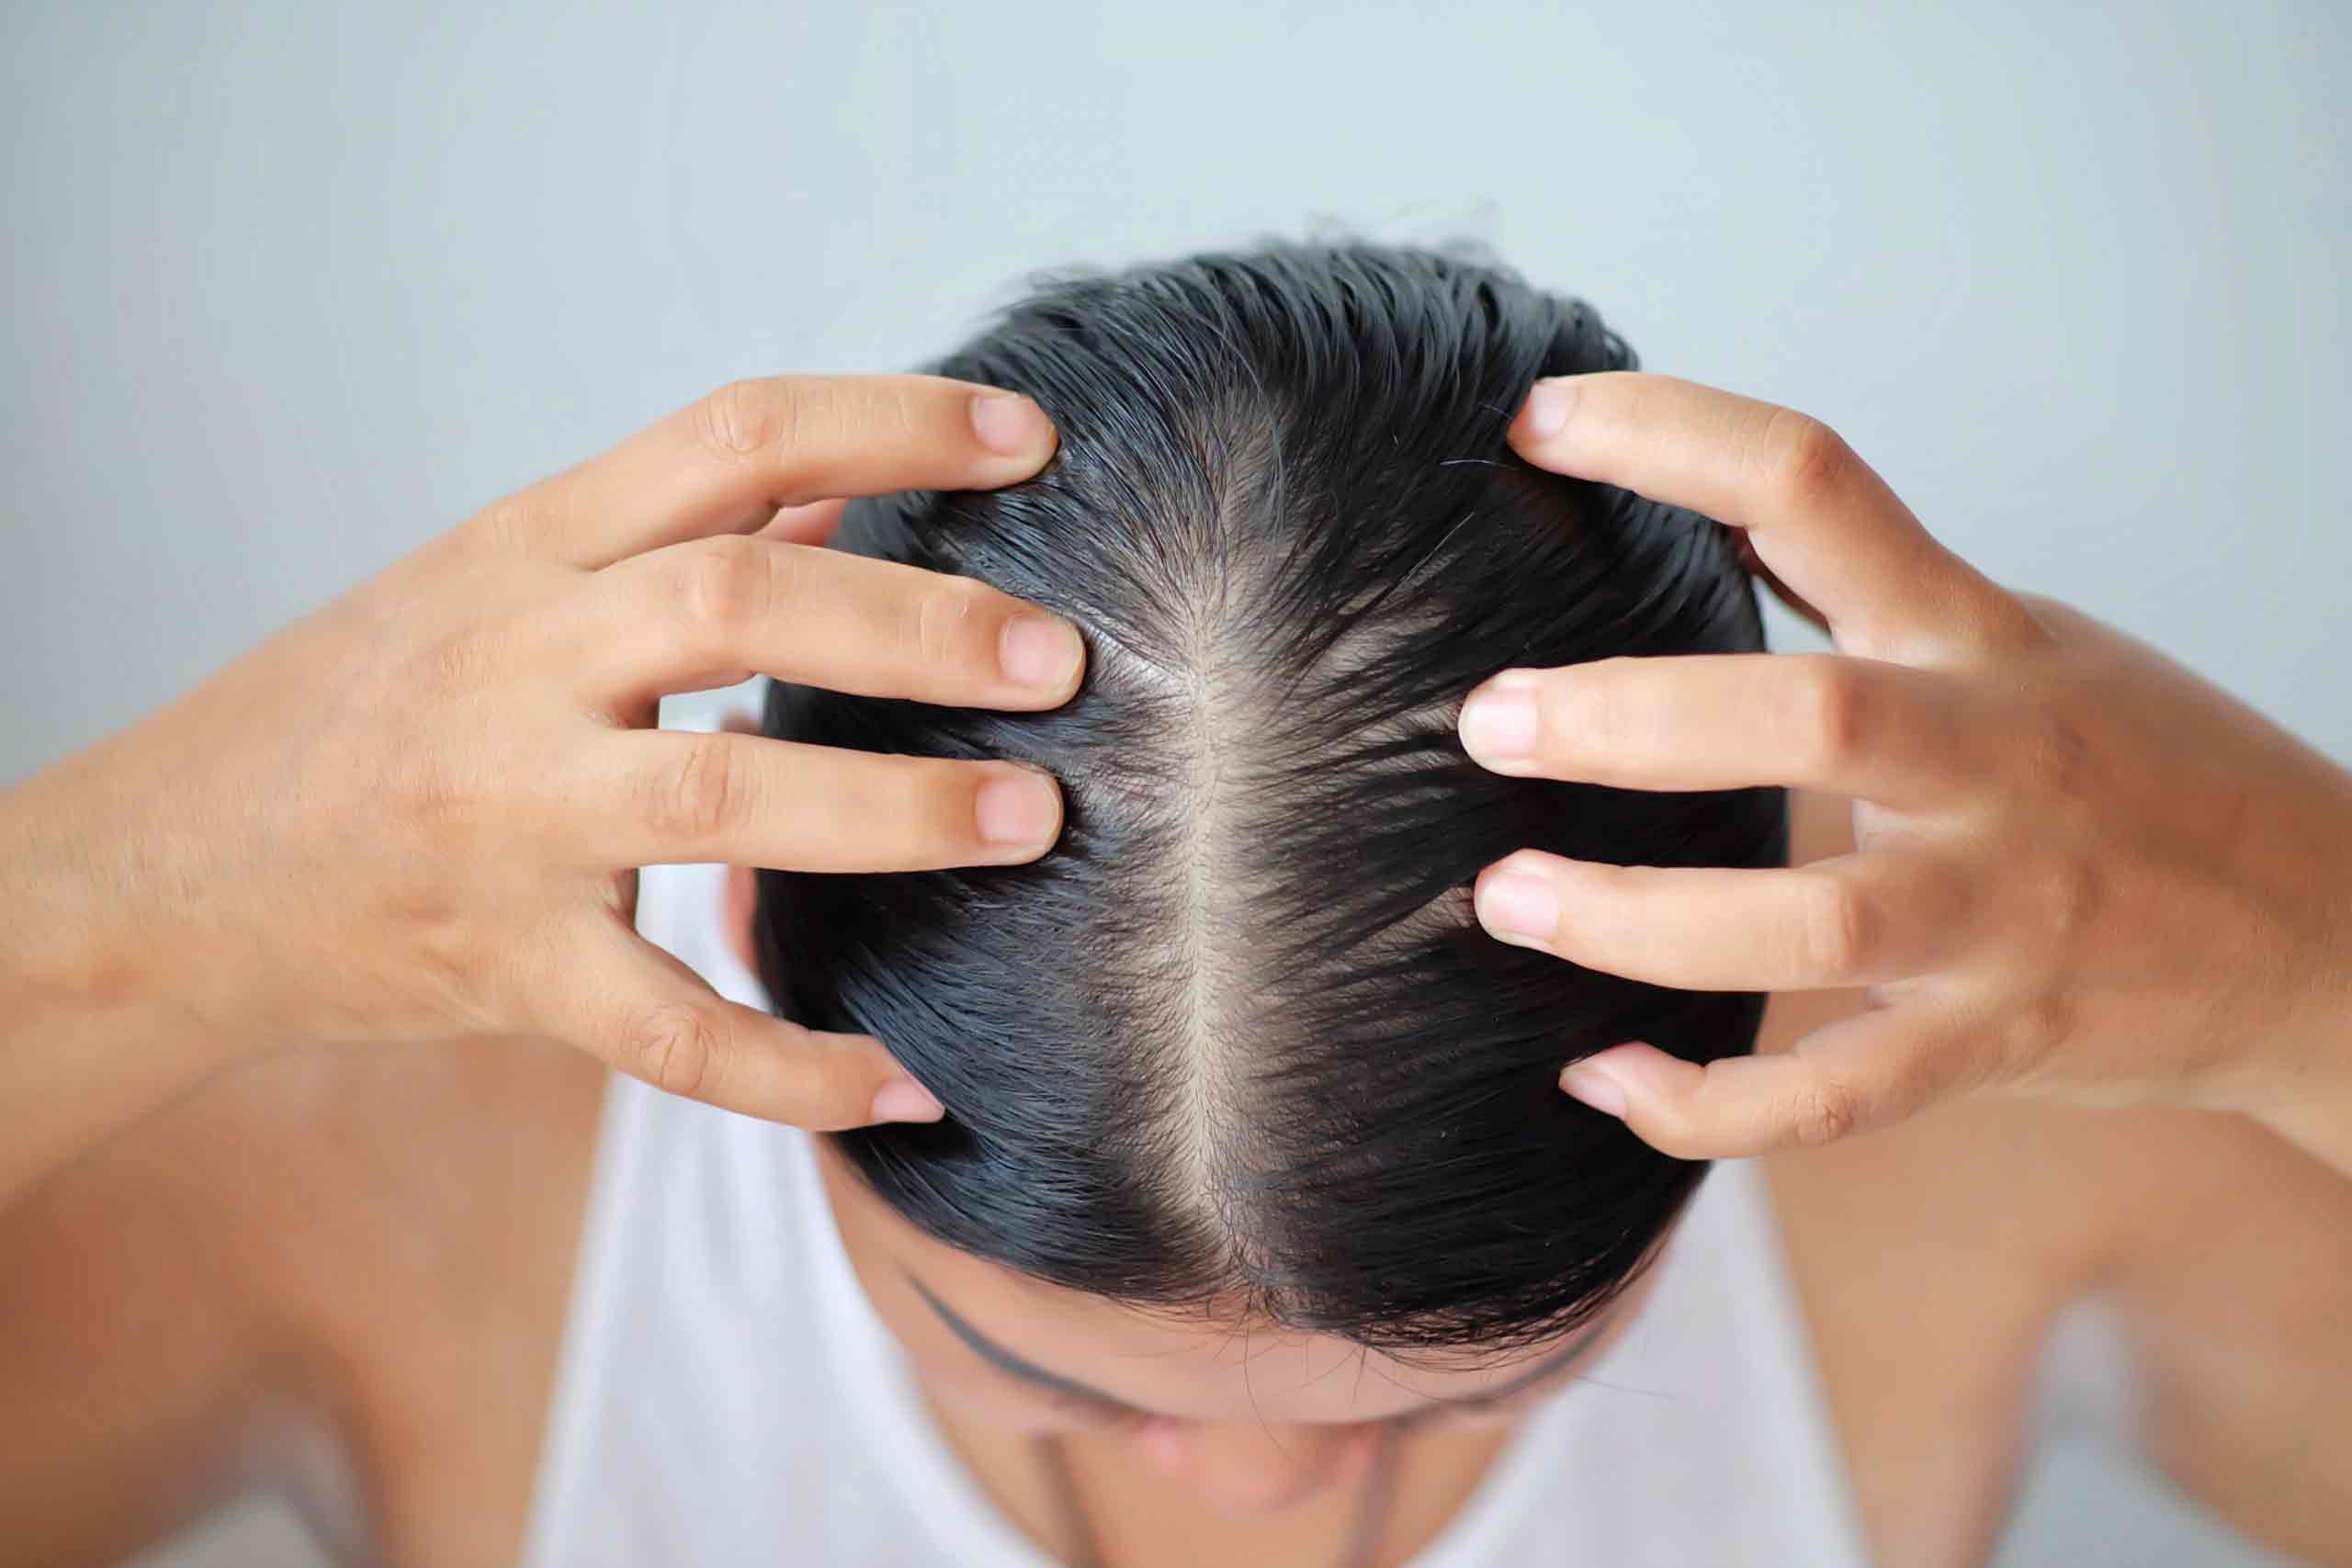 Hair Loss In Women: Everything You Need To Know | HairMD